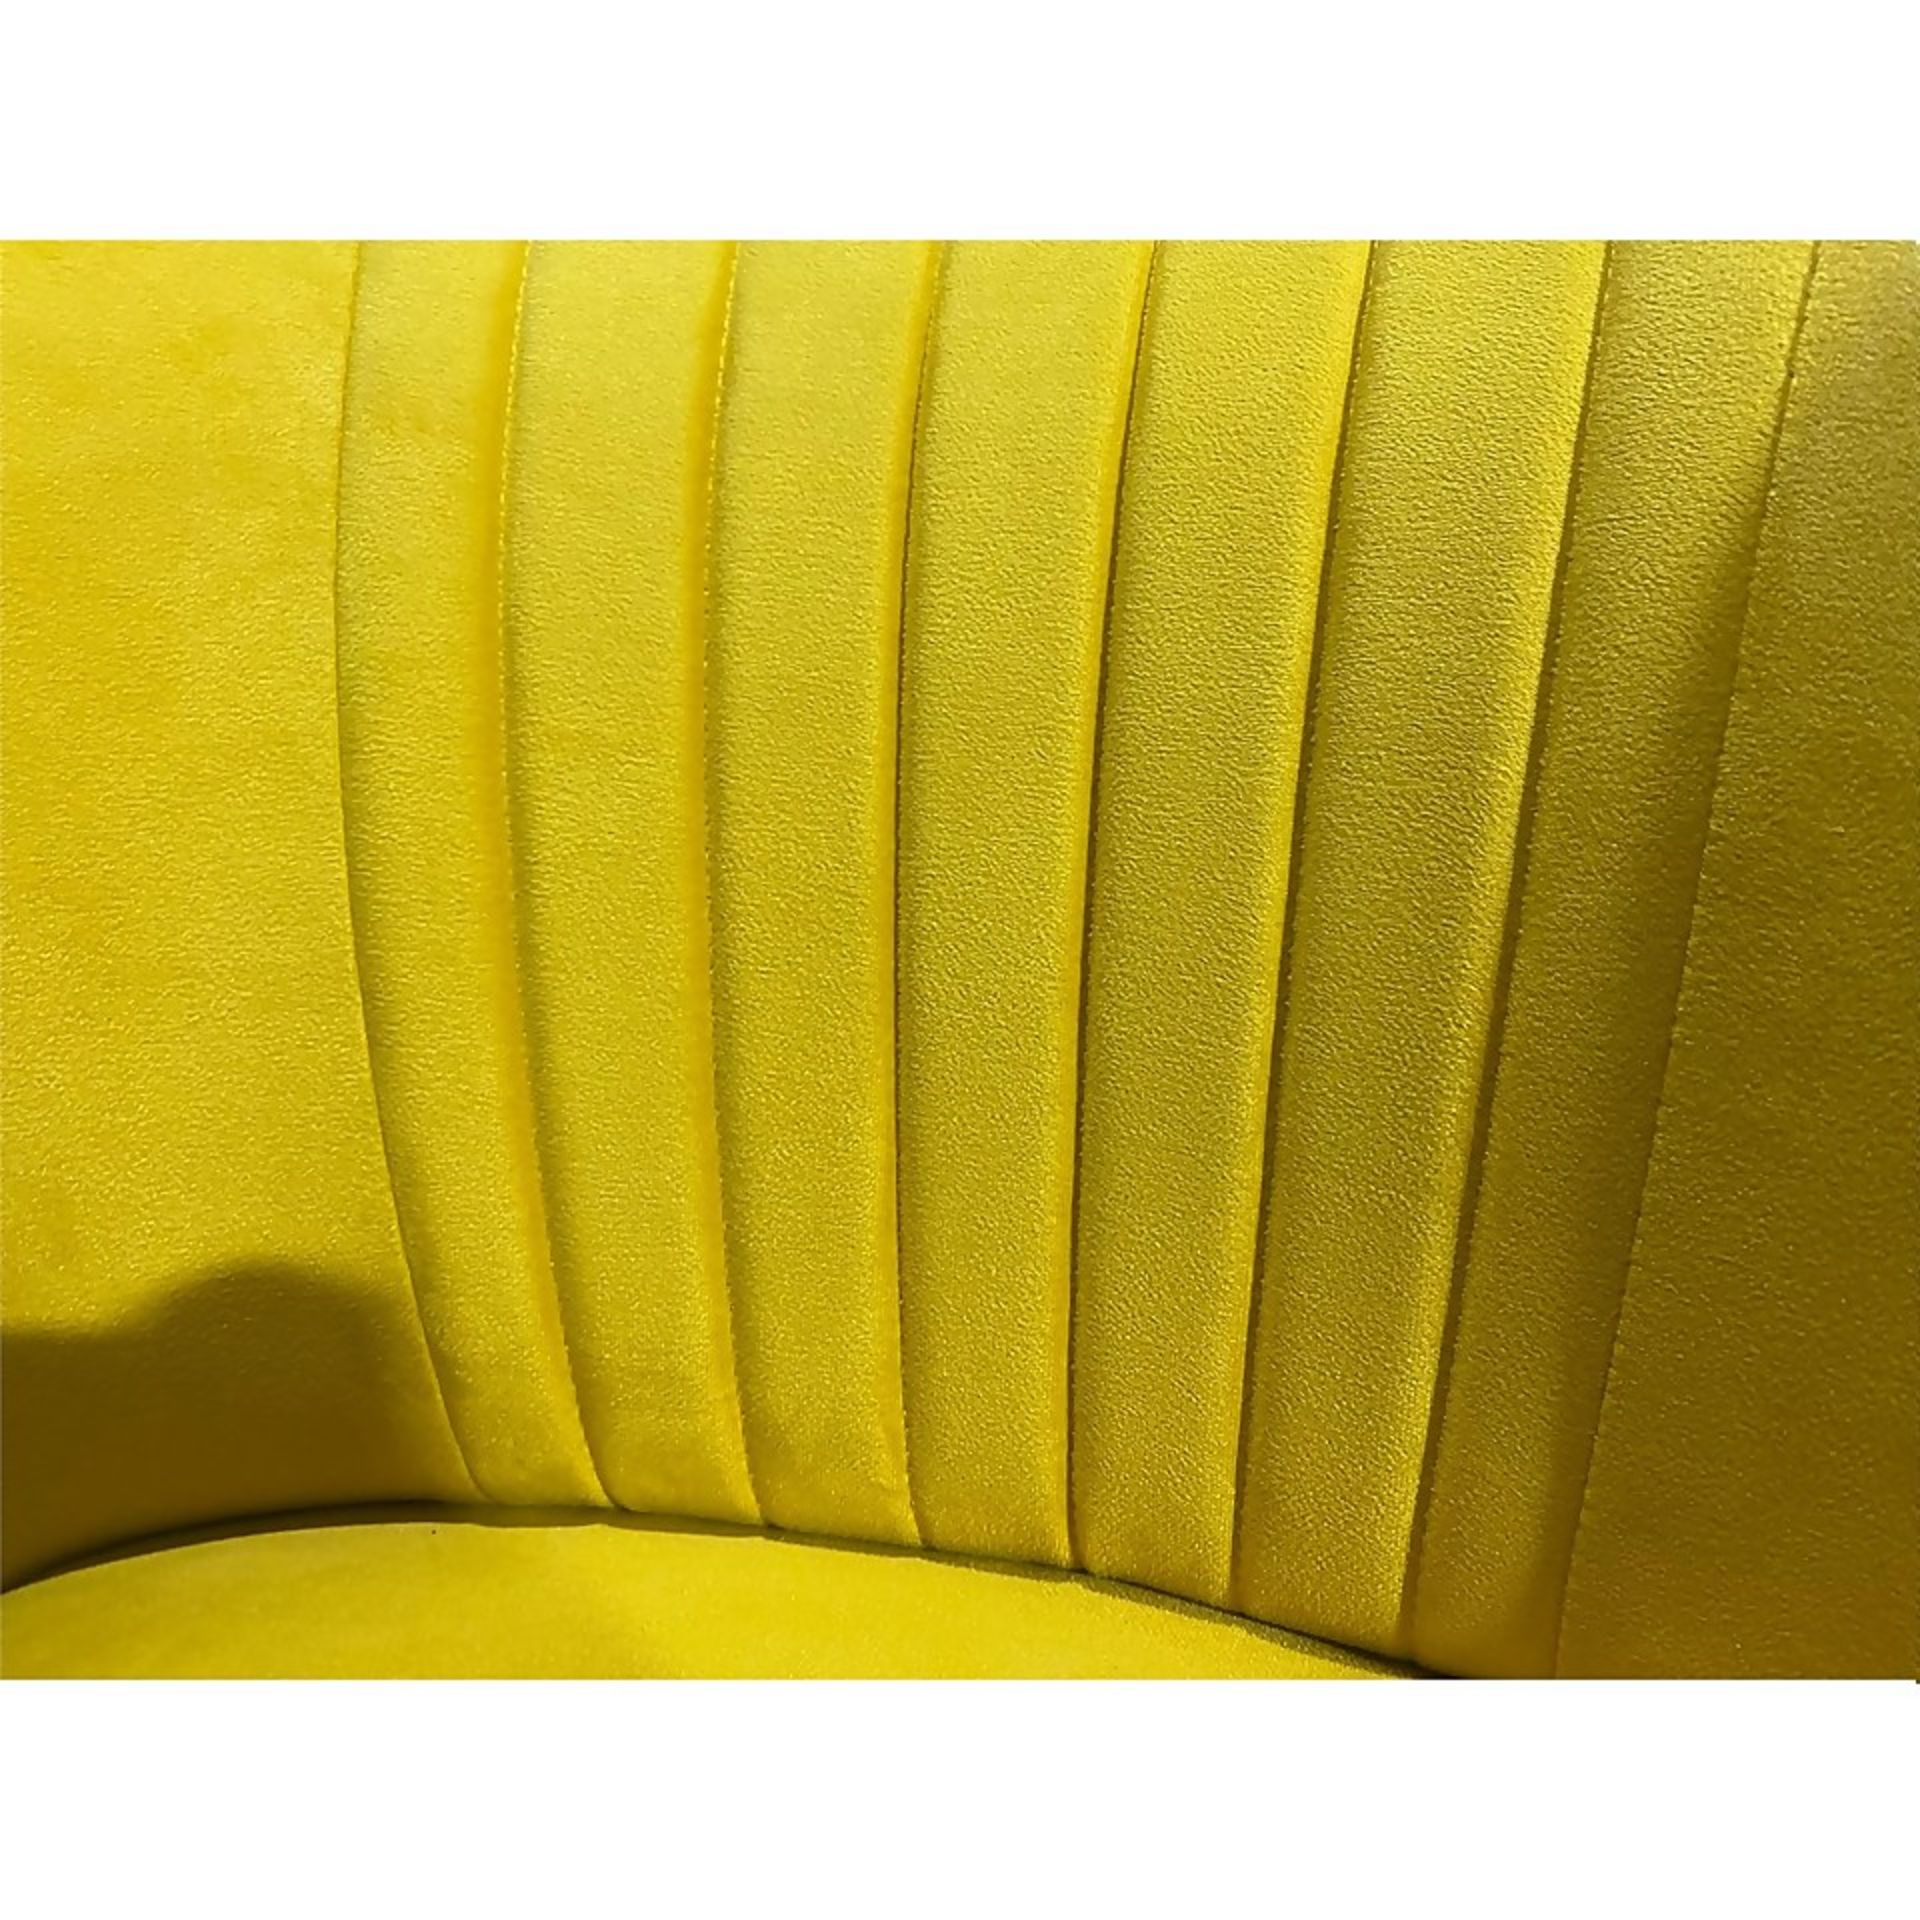 (R6K) 1 X Occasional Chair Ochre. Velvet Cover With Rubberwood Legs (H72xW60xD70cm) - Image 3 of 6